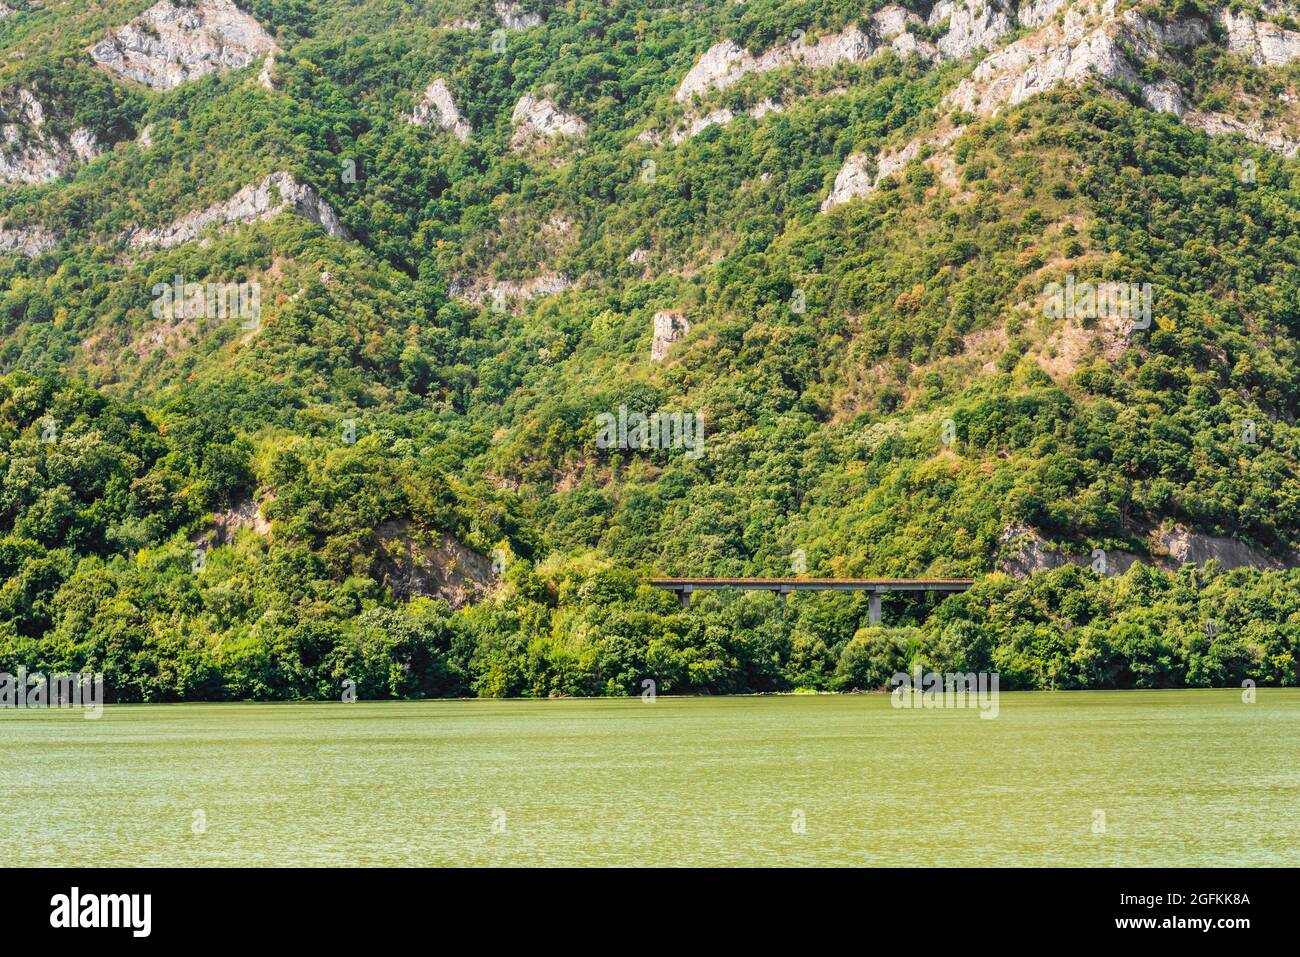 A landscape of Danube river, with forest and rocks Stock Photo